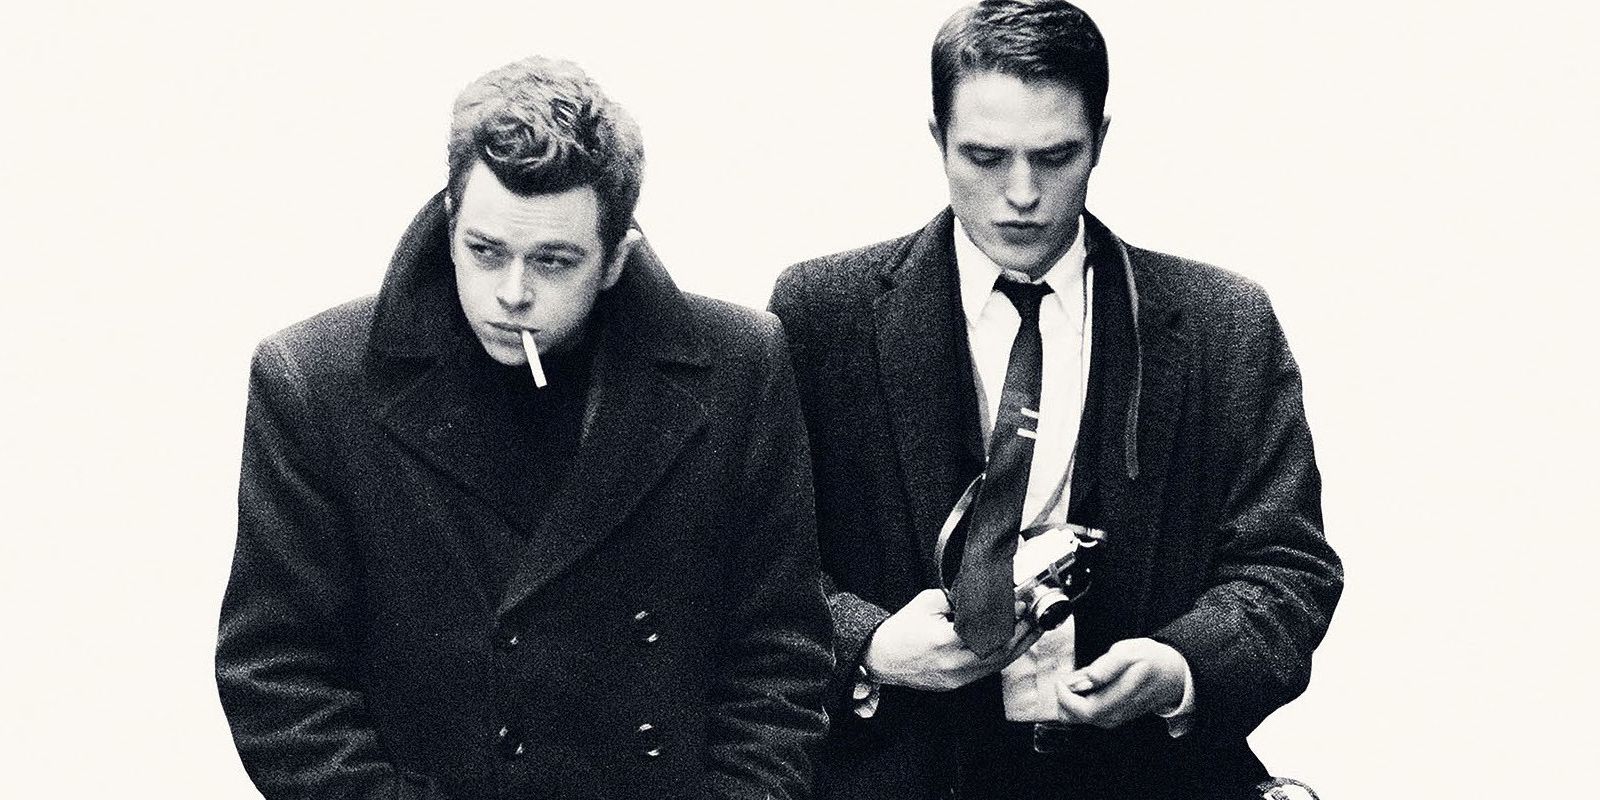 Poster for Life showing Dane DeHaan and Robert Pattinson